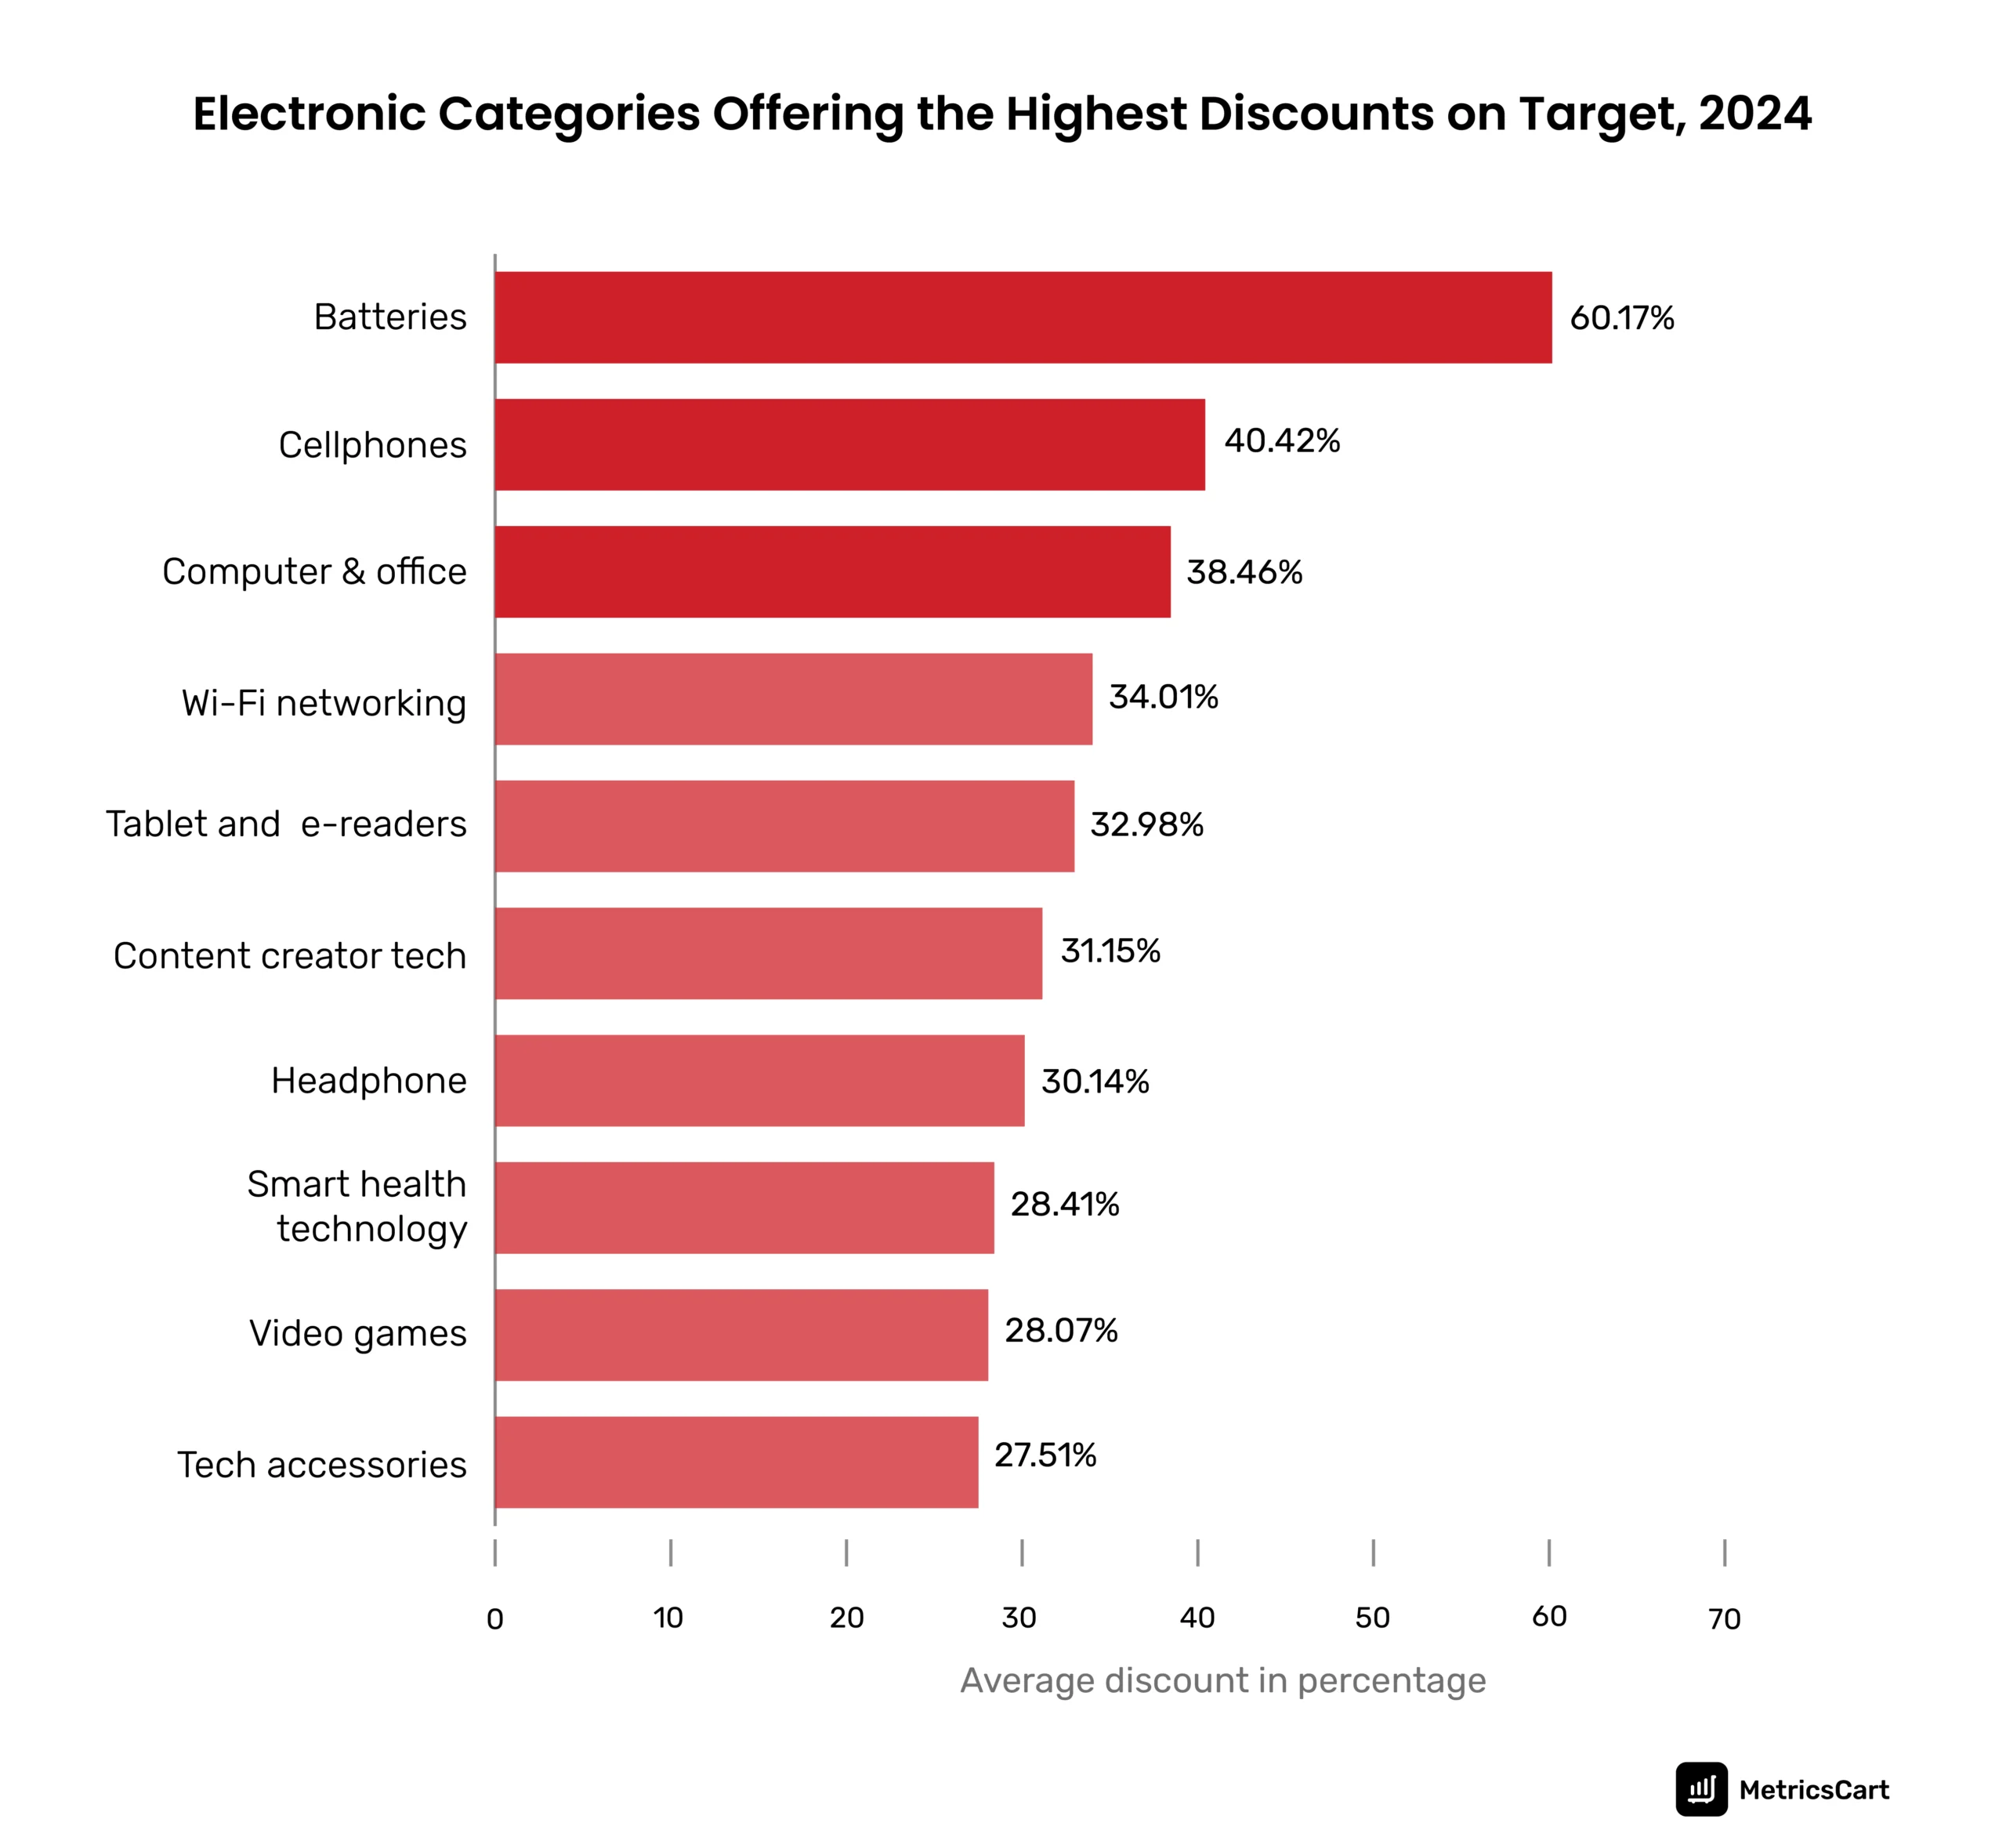 the graph shows the electronic categories with the highest discounts on Target in 2024